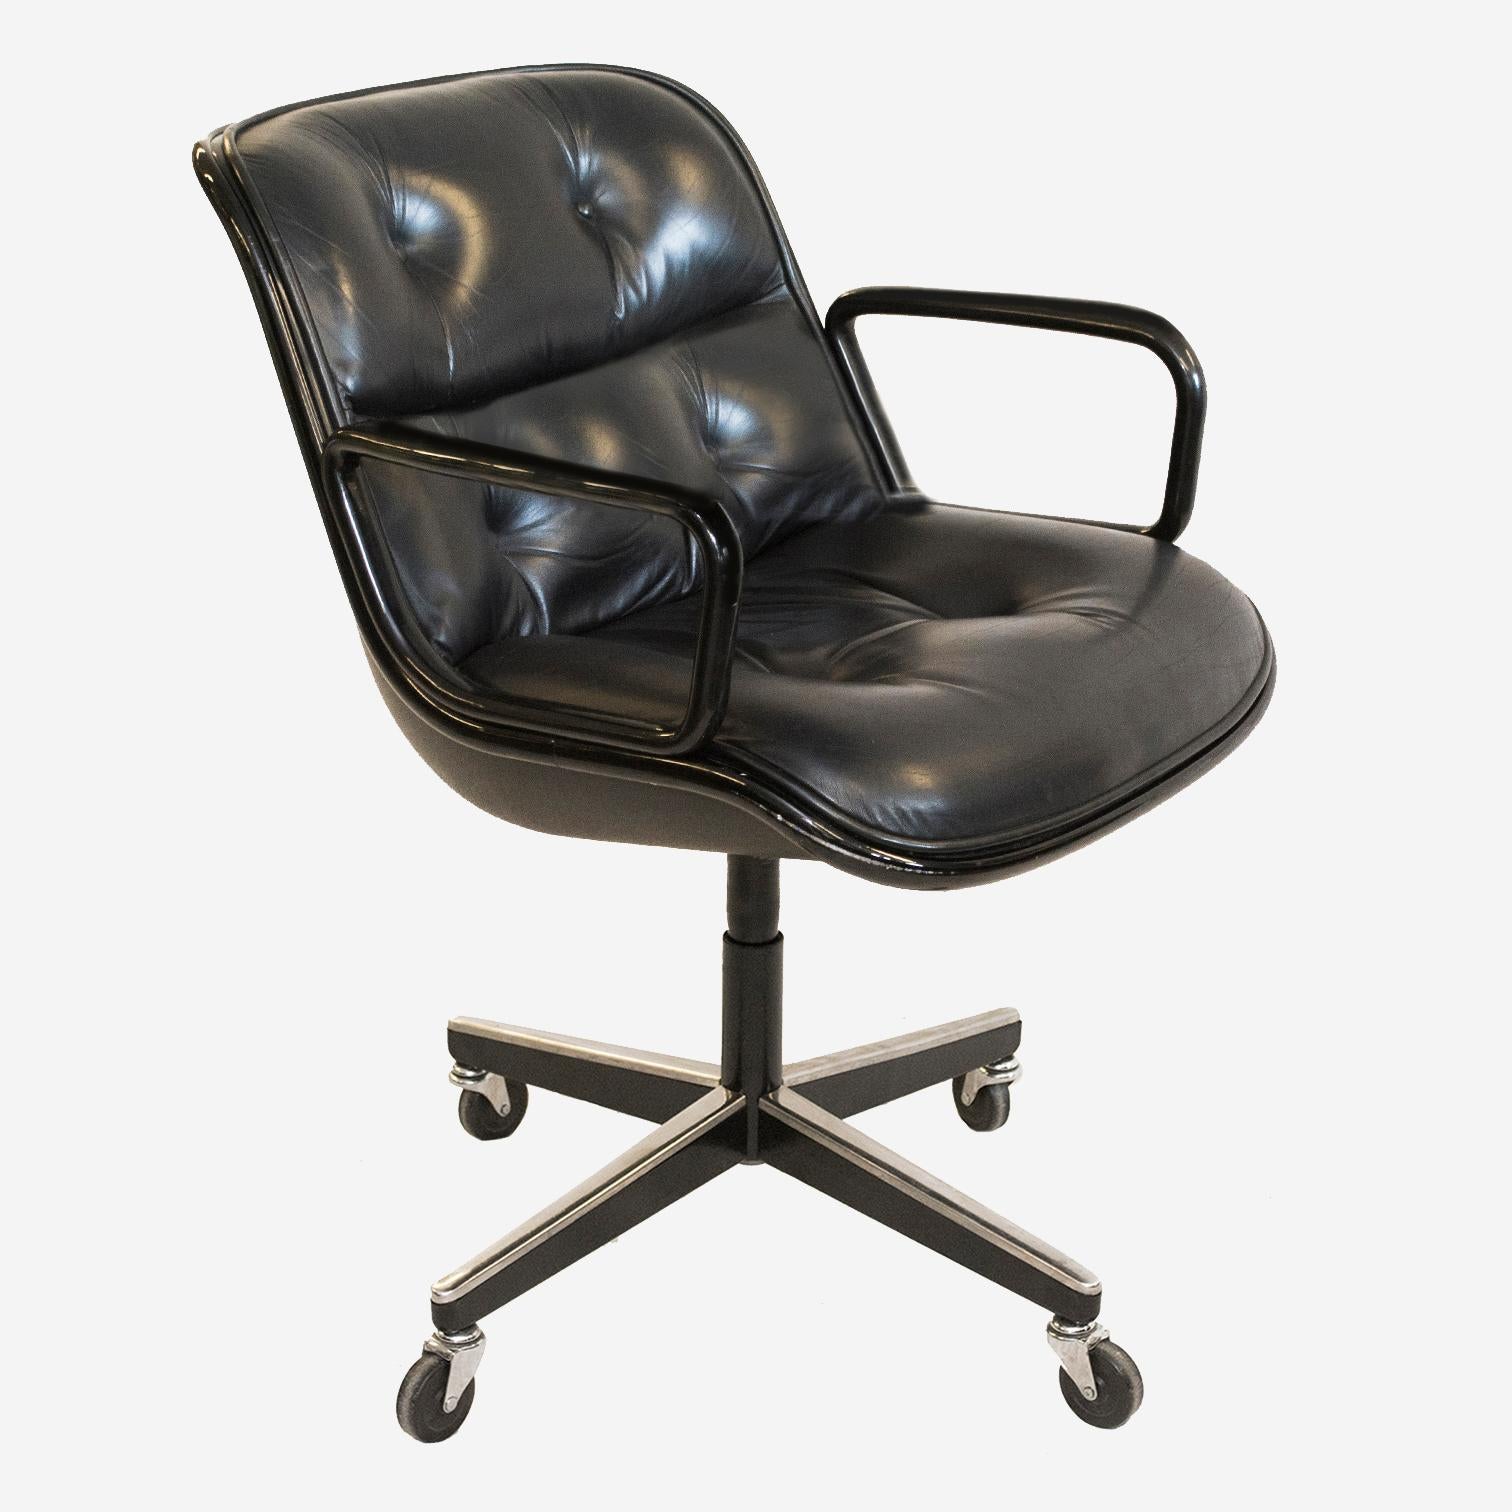 Late 20th Century Vintage Knoll Pollock Swivel Chair in Black Leather, Matte Black Frame